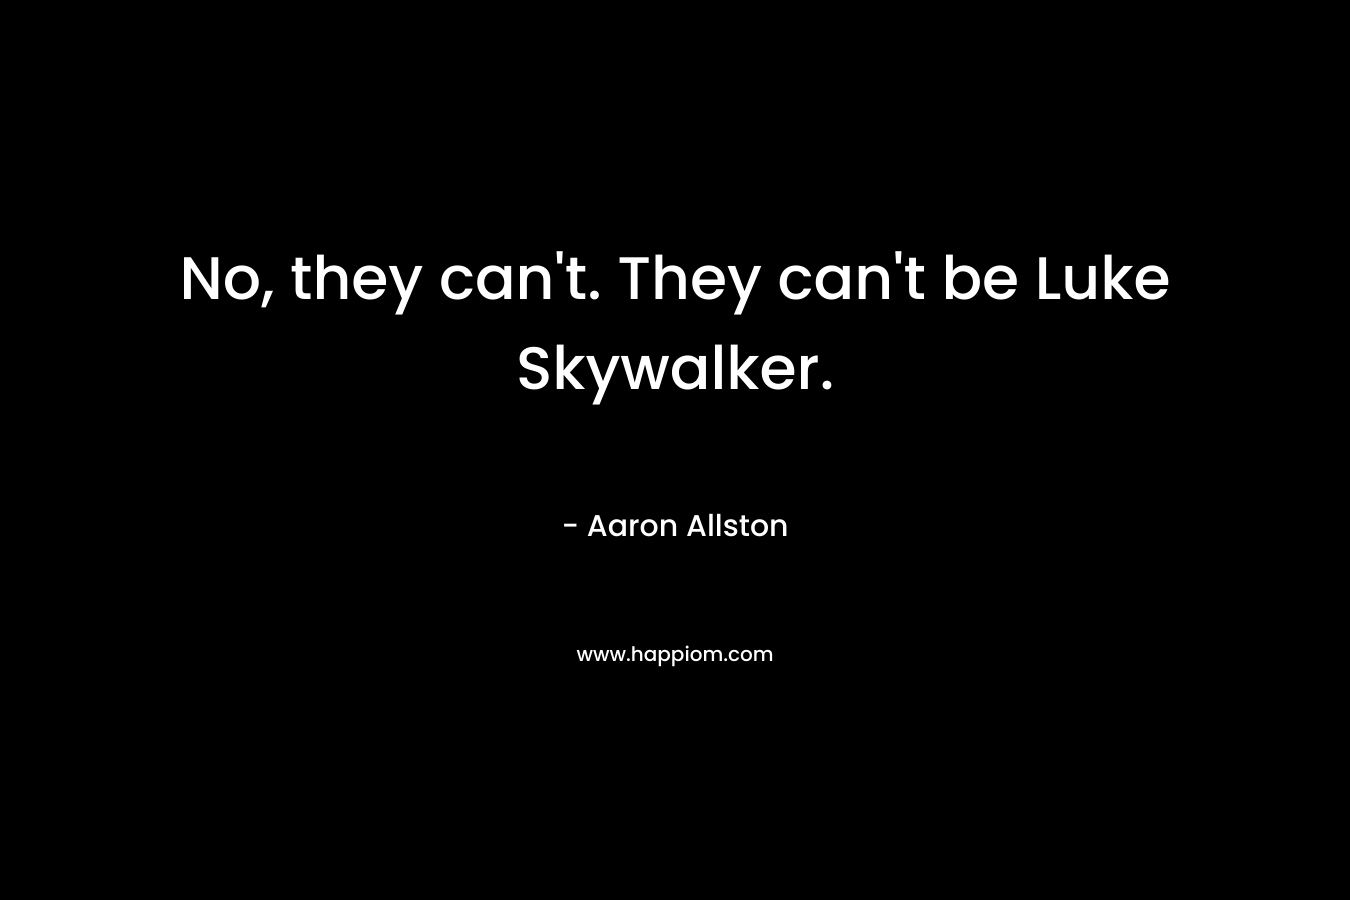 No, they can't. They can't be Luke Skywalker.